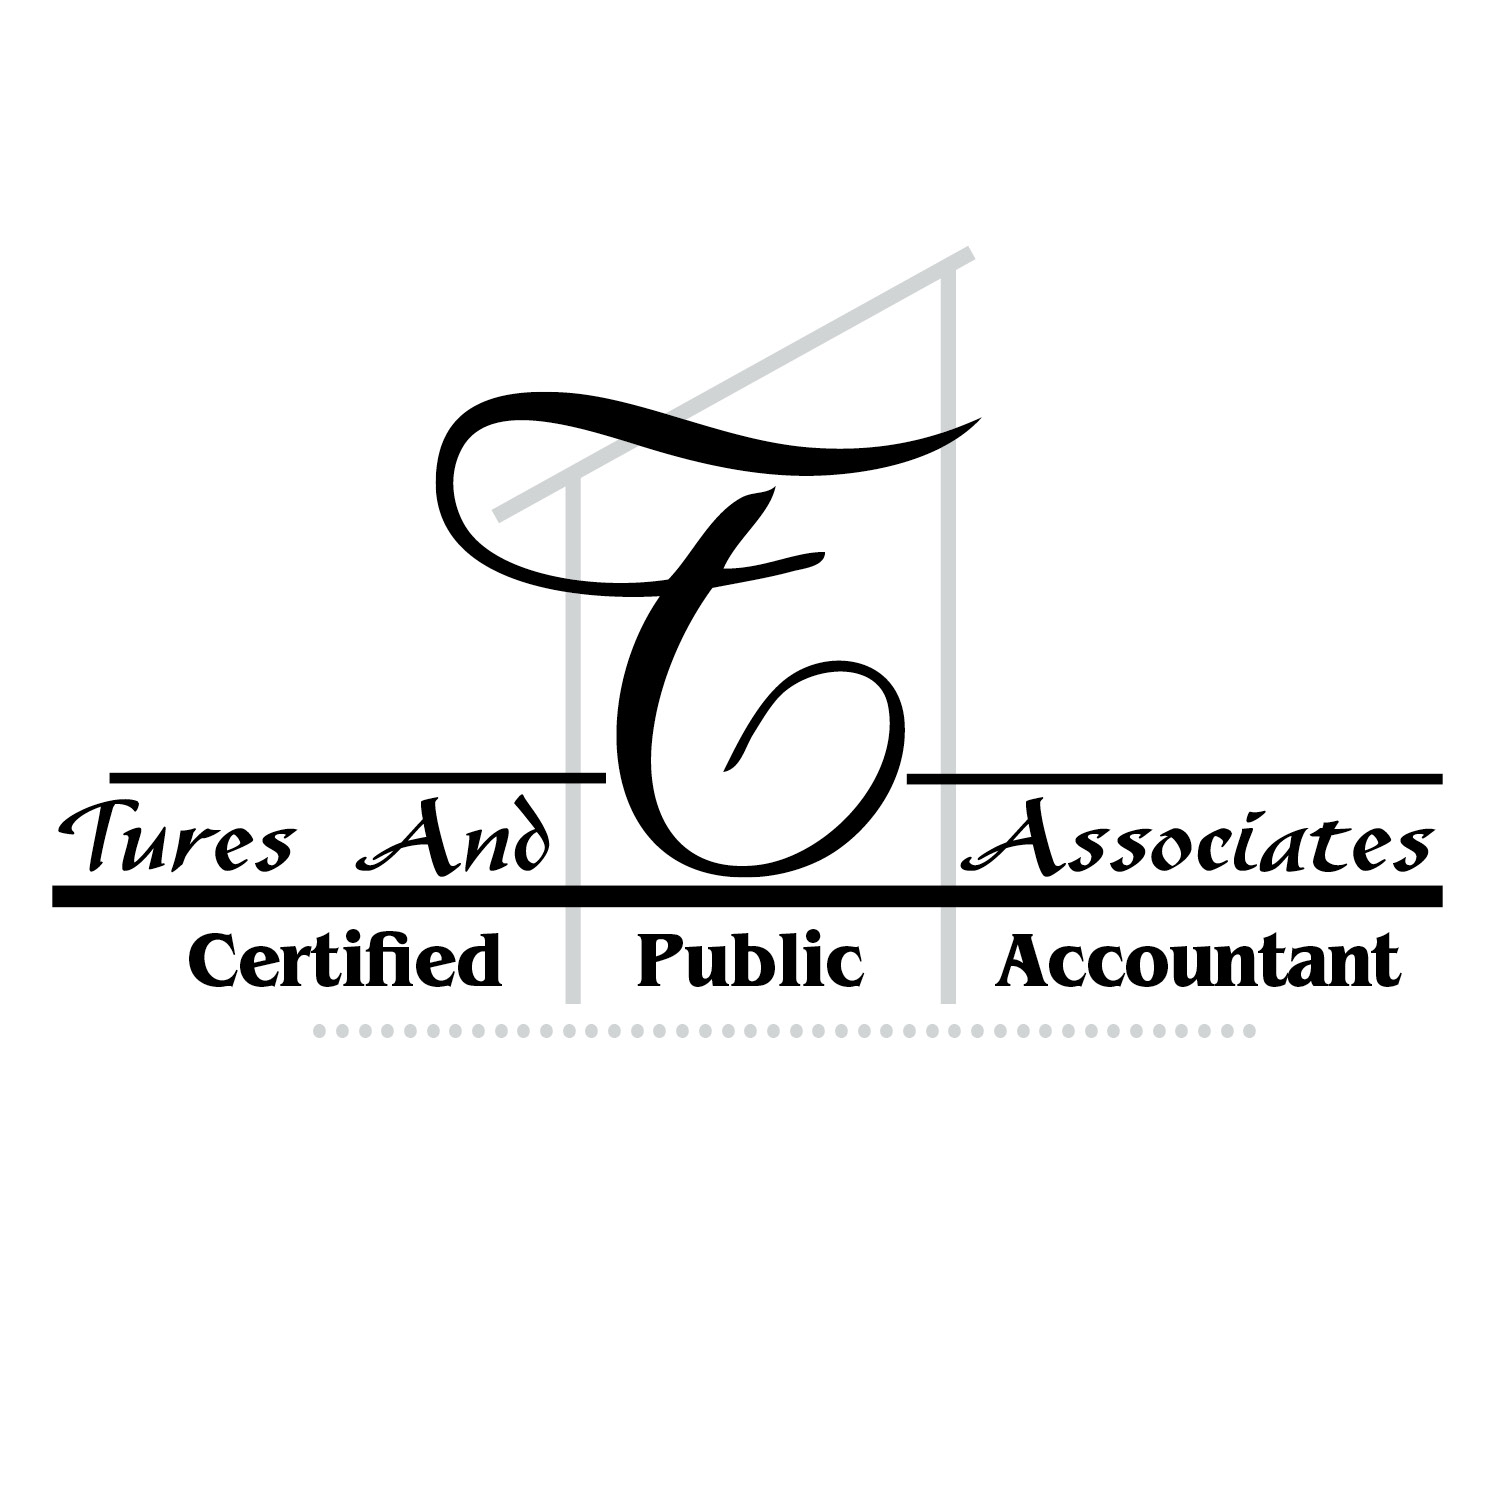 Tures and Associates